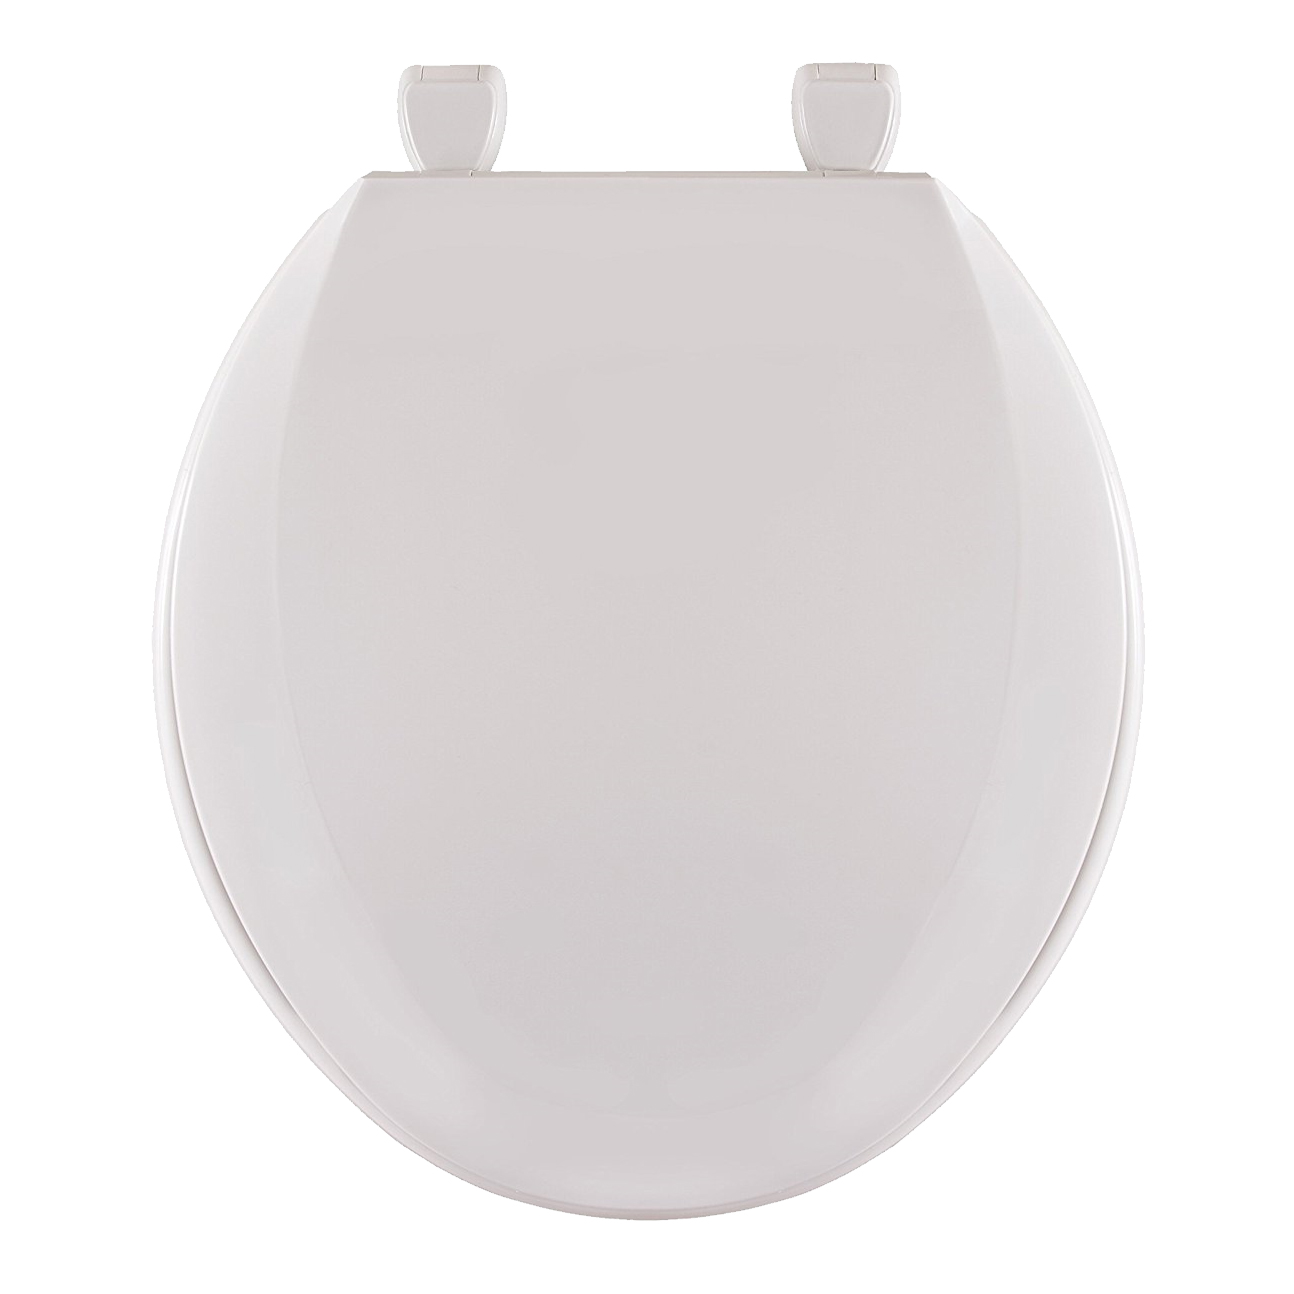 Toilet Seat Round Extra Heavy-Duty Commercial w/Cover White